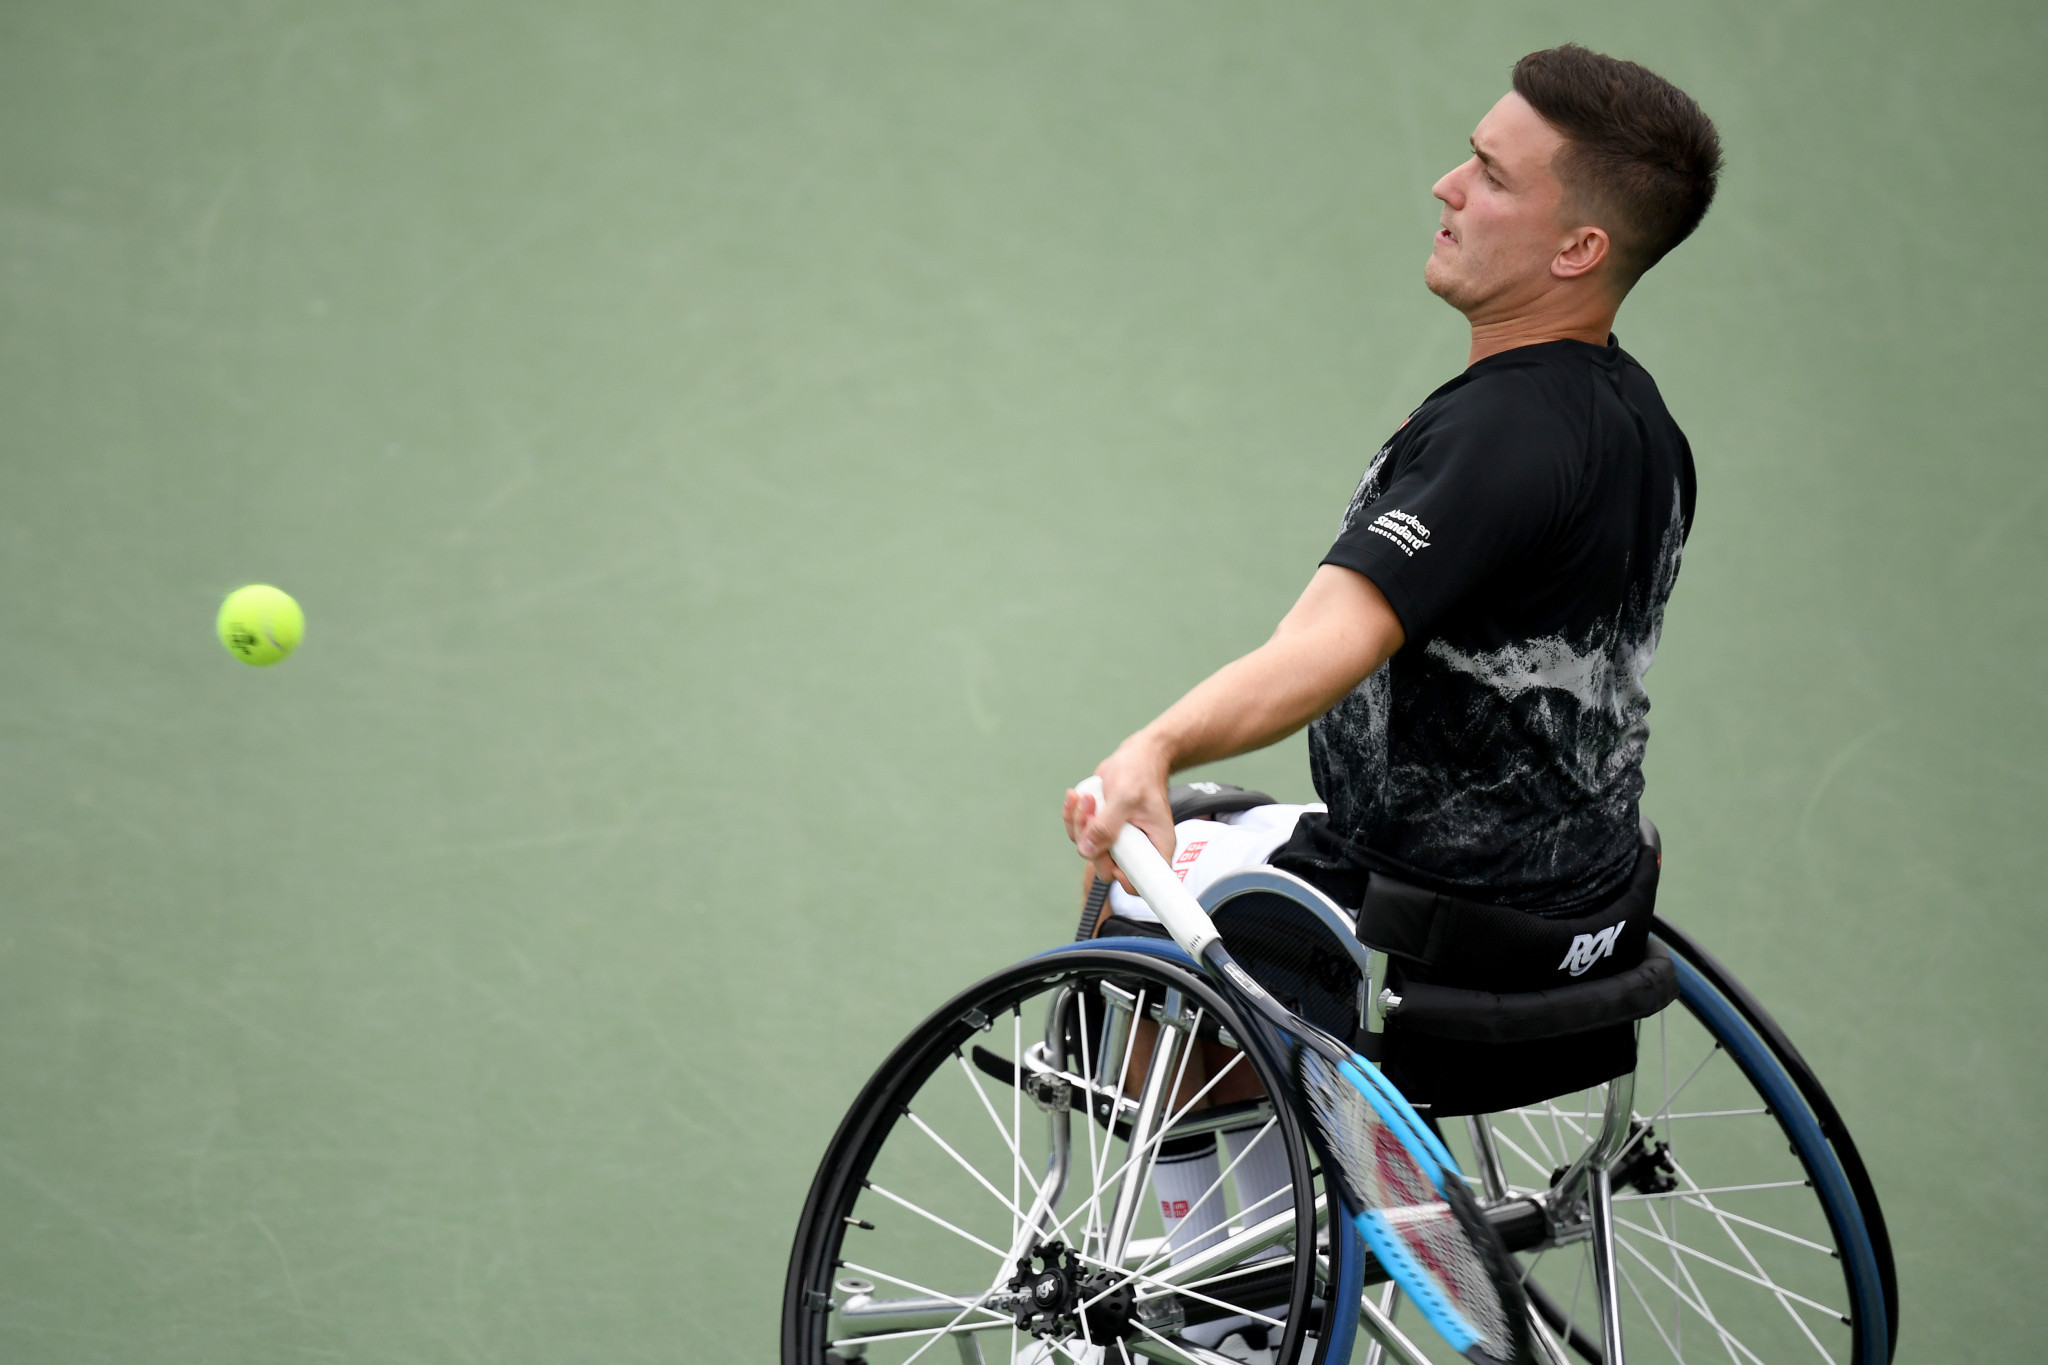 Britain's Alfie Hewett progressed to the men's singles and doubles finals ©Getty Images